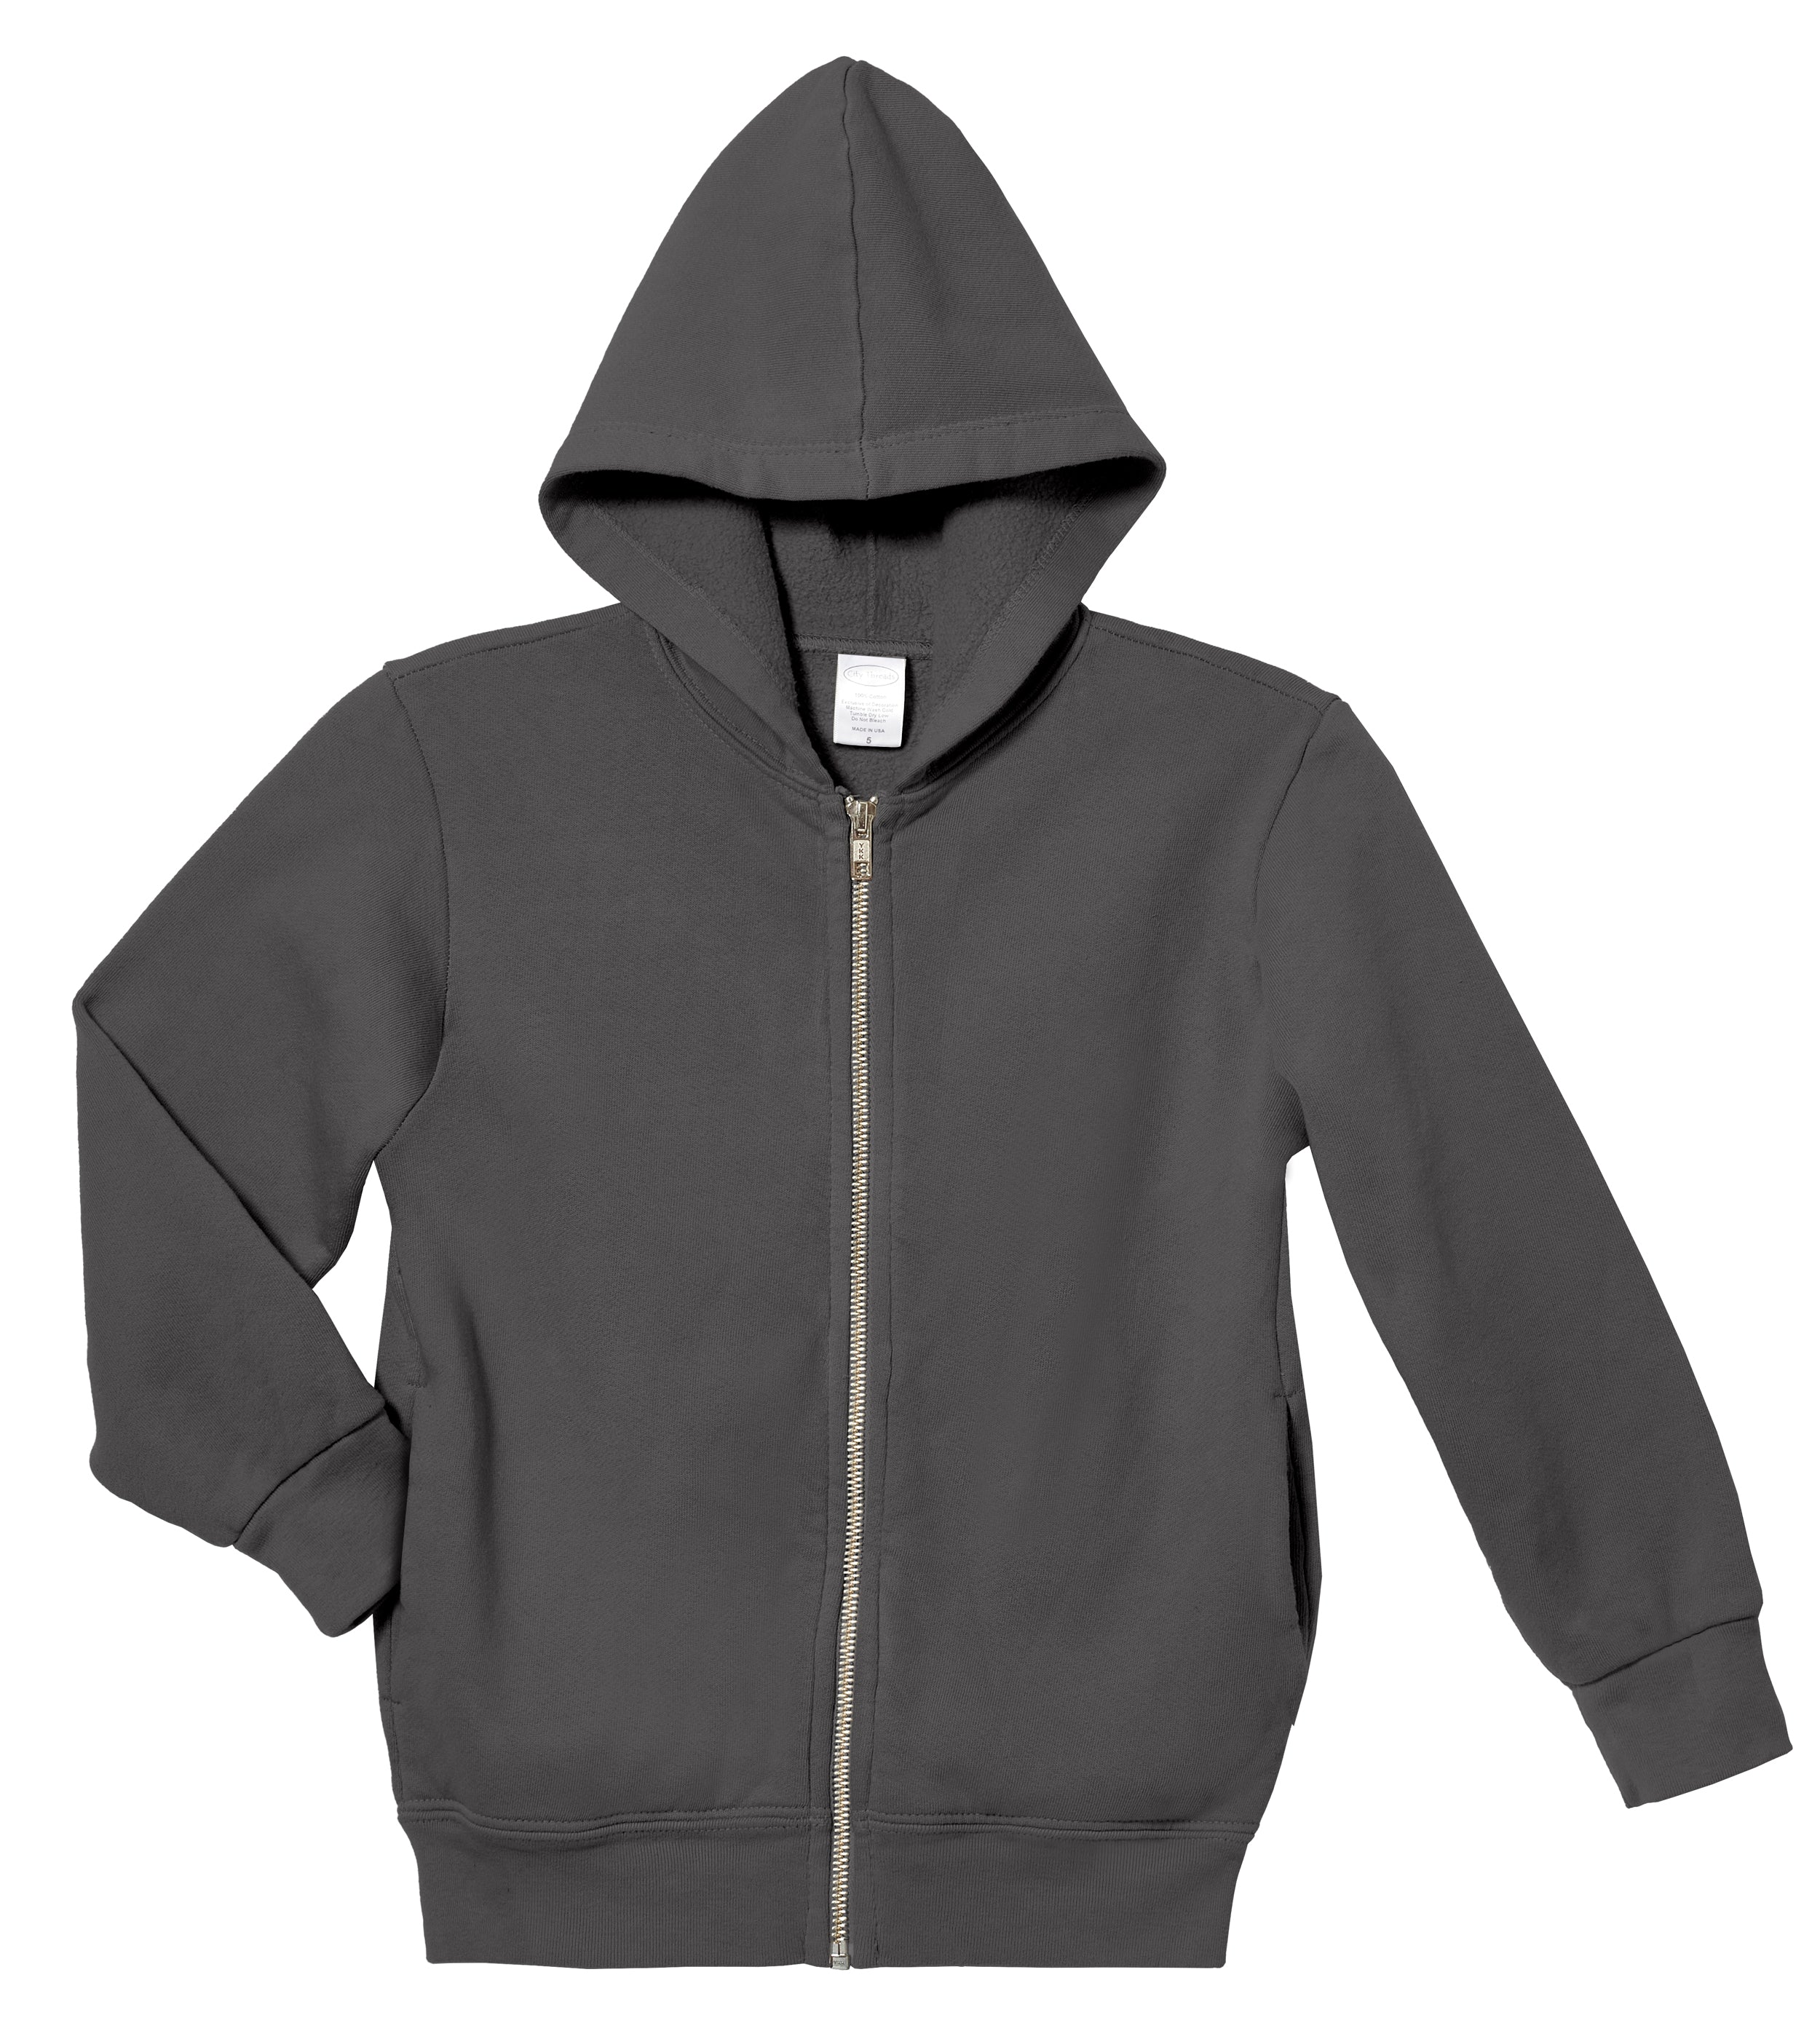 Black & Charcoal Grey Unisex Hoodie With Built-In Face Mask